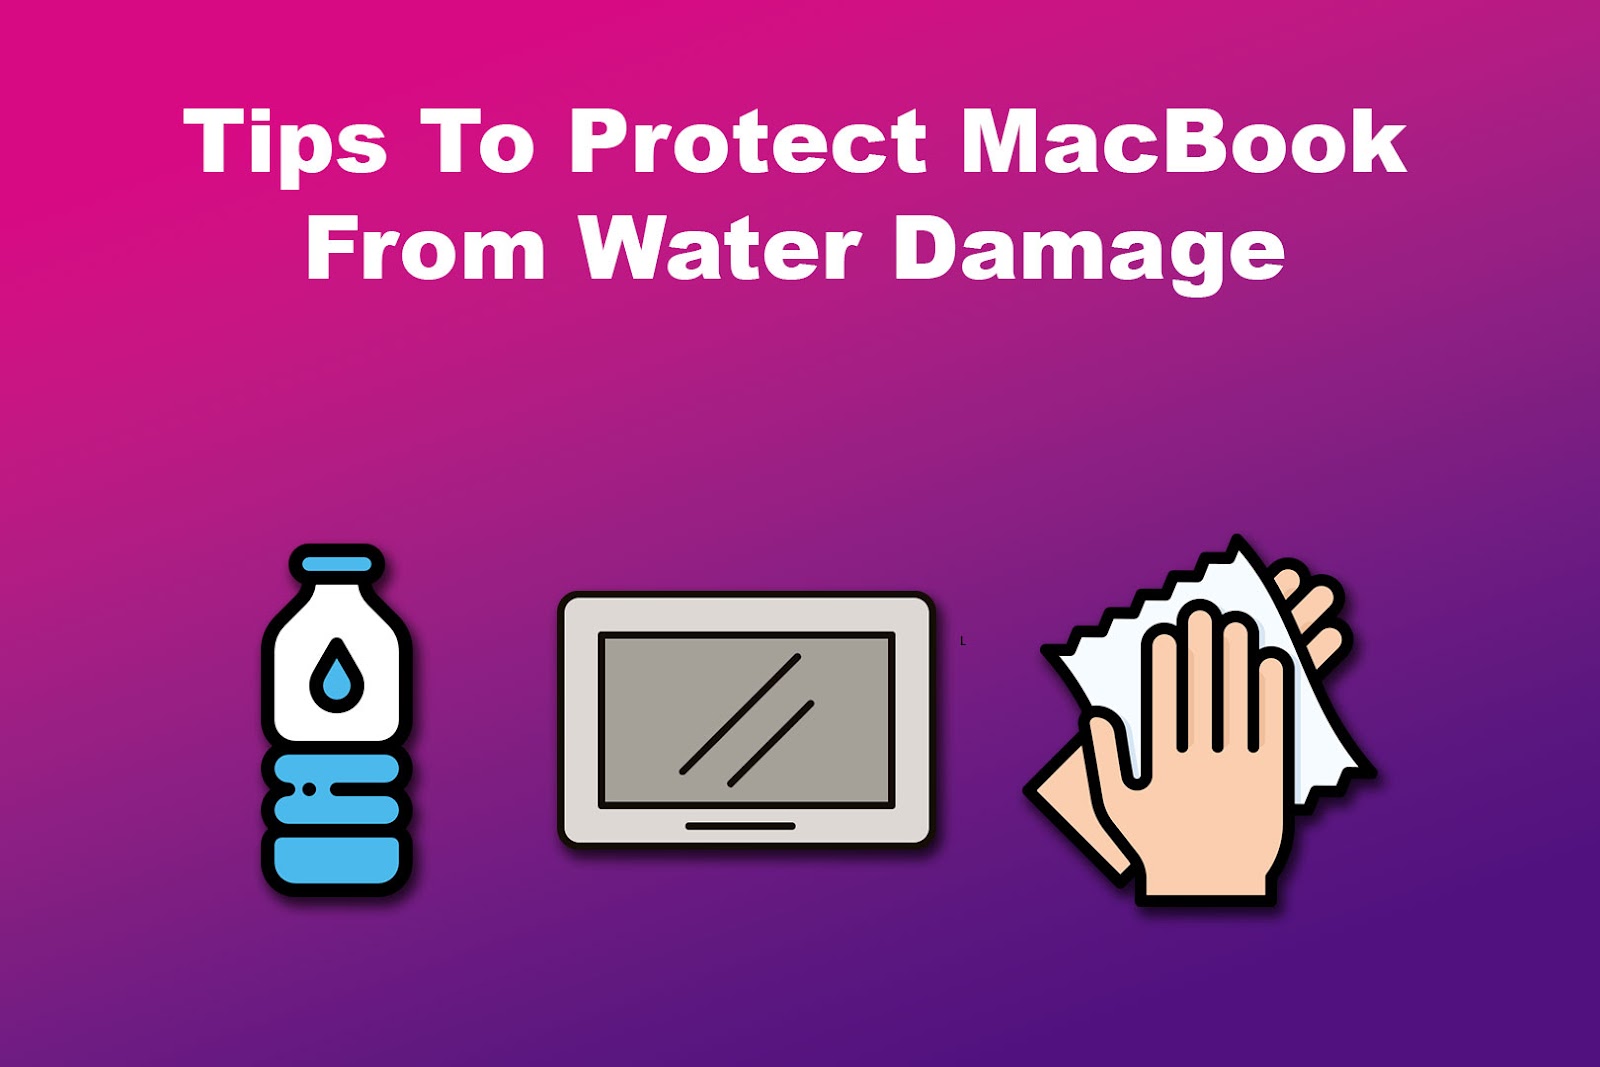 Tips To Protect MacBook From Water Damage